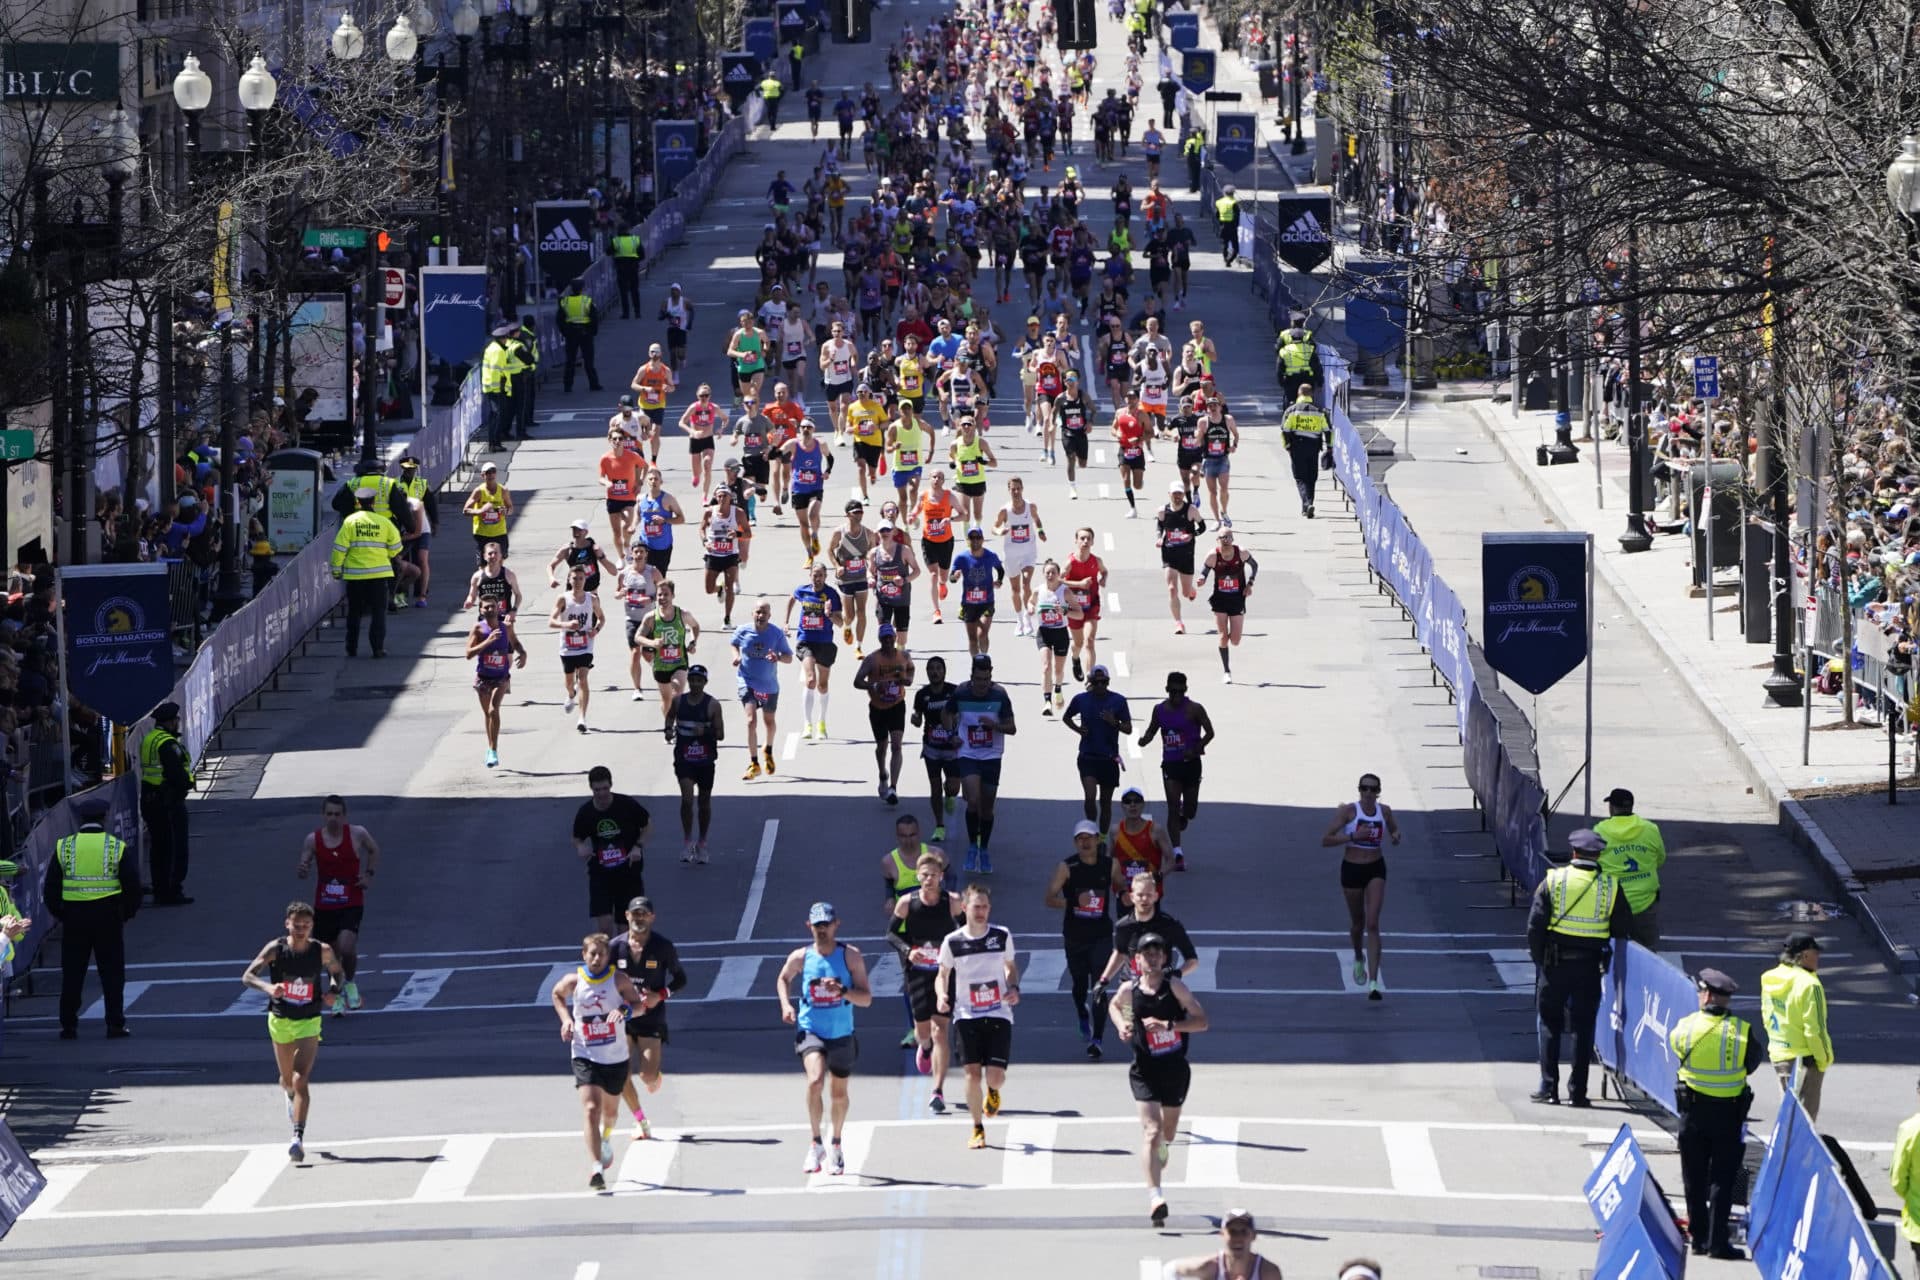 Runners approach the finish line of the 2022 Boston Marathon. (Charles Krupa/AP)